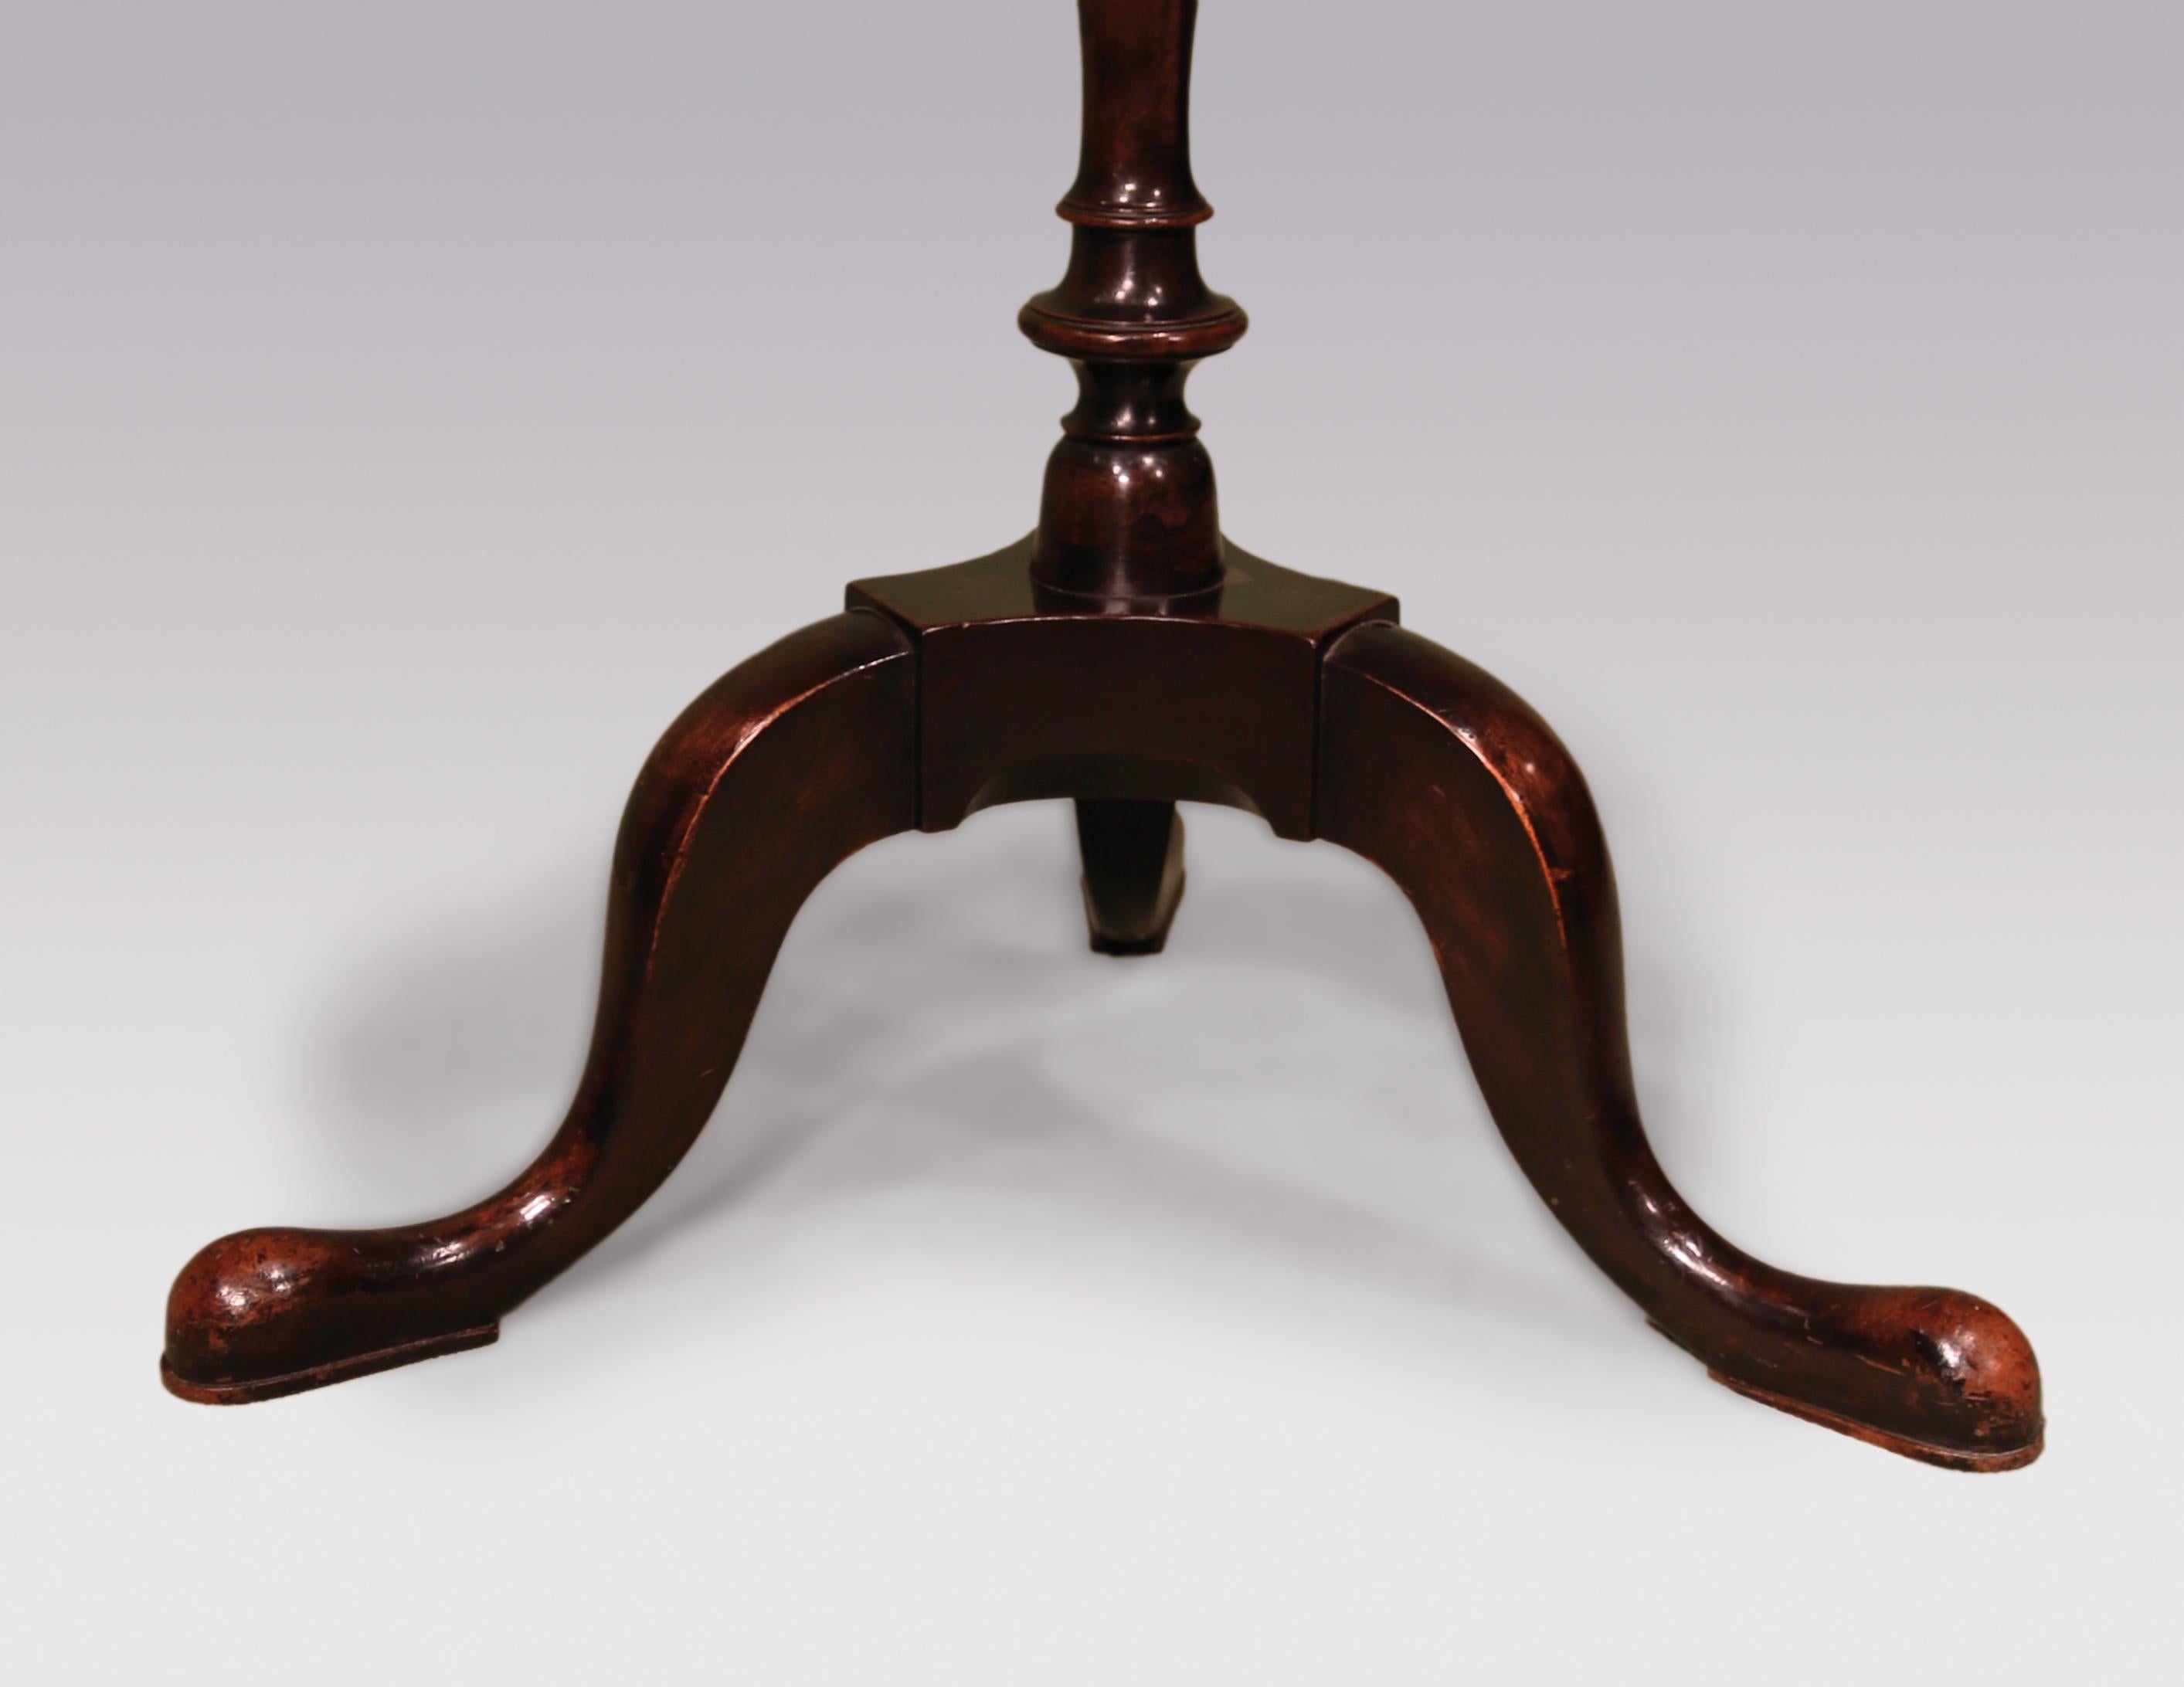 English Mid-18th Century Mahogany Kettle Stand or Tripod Table